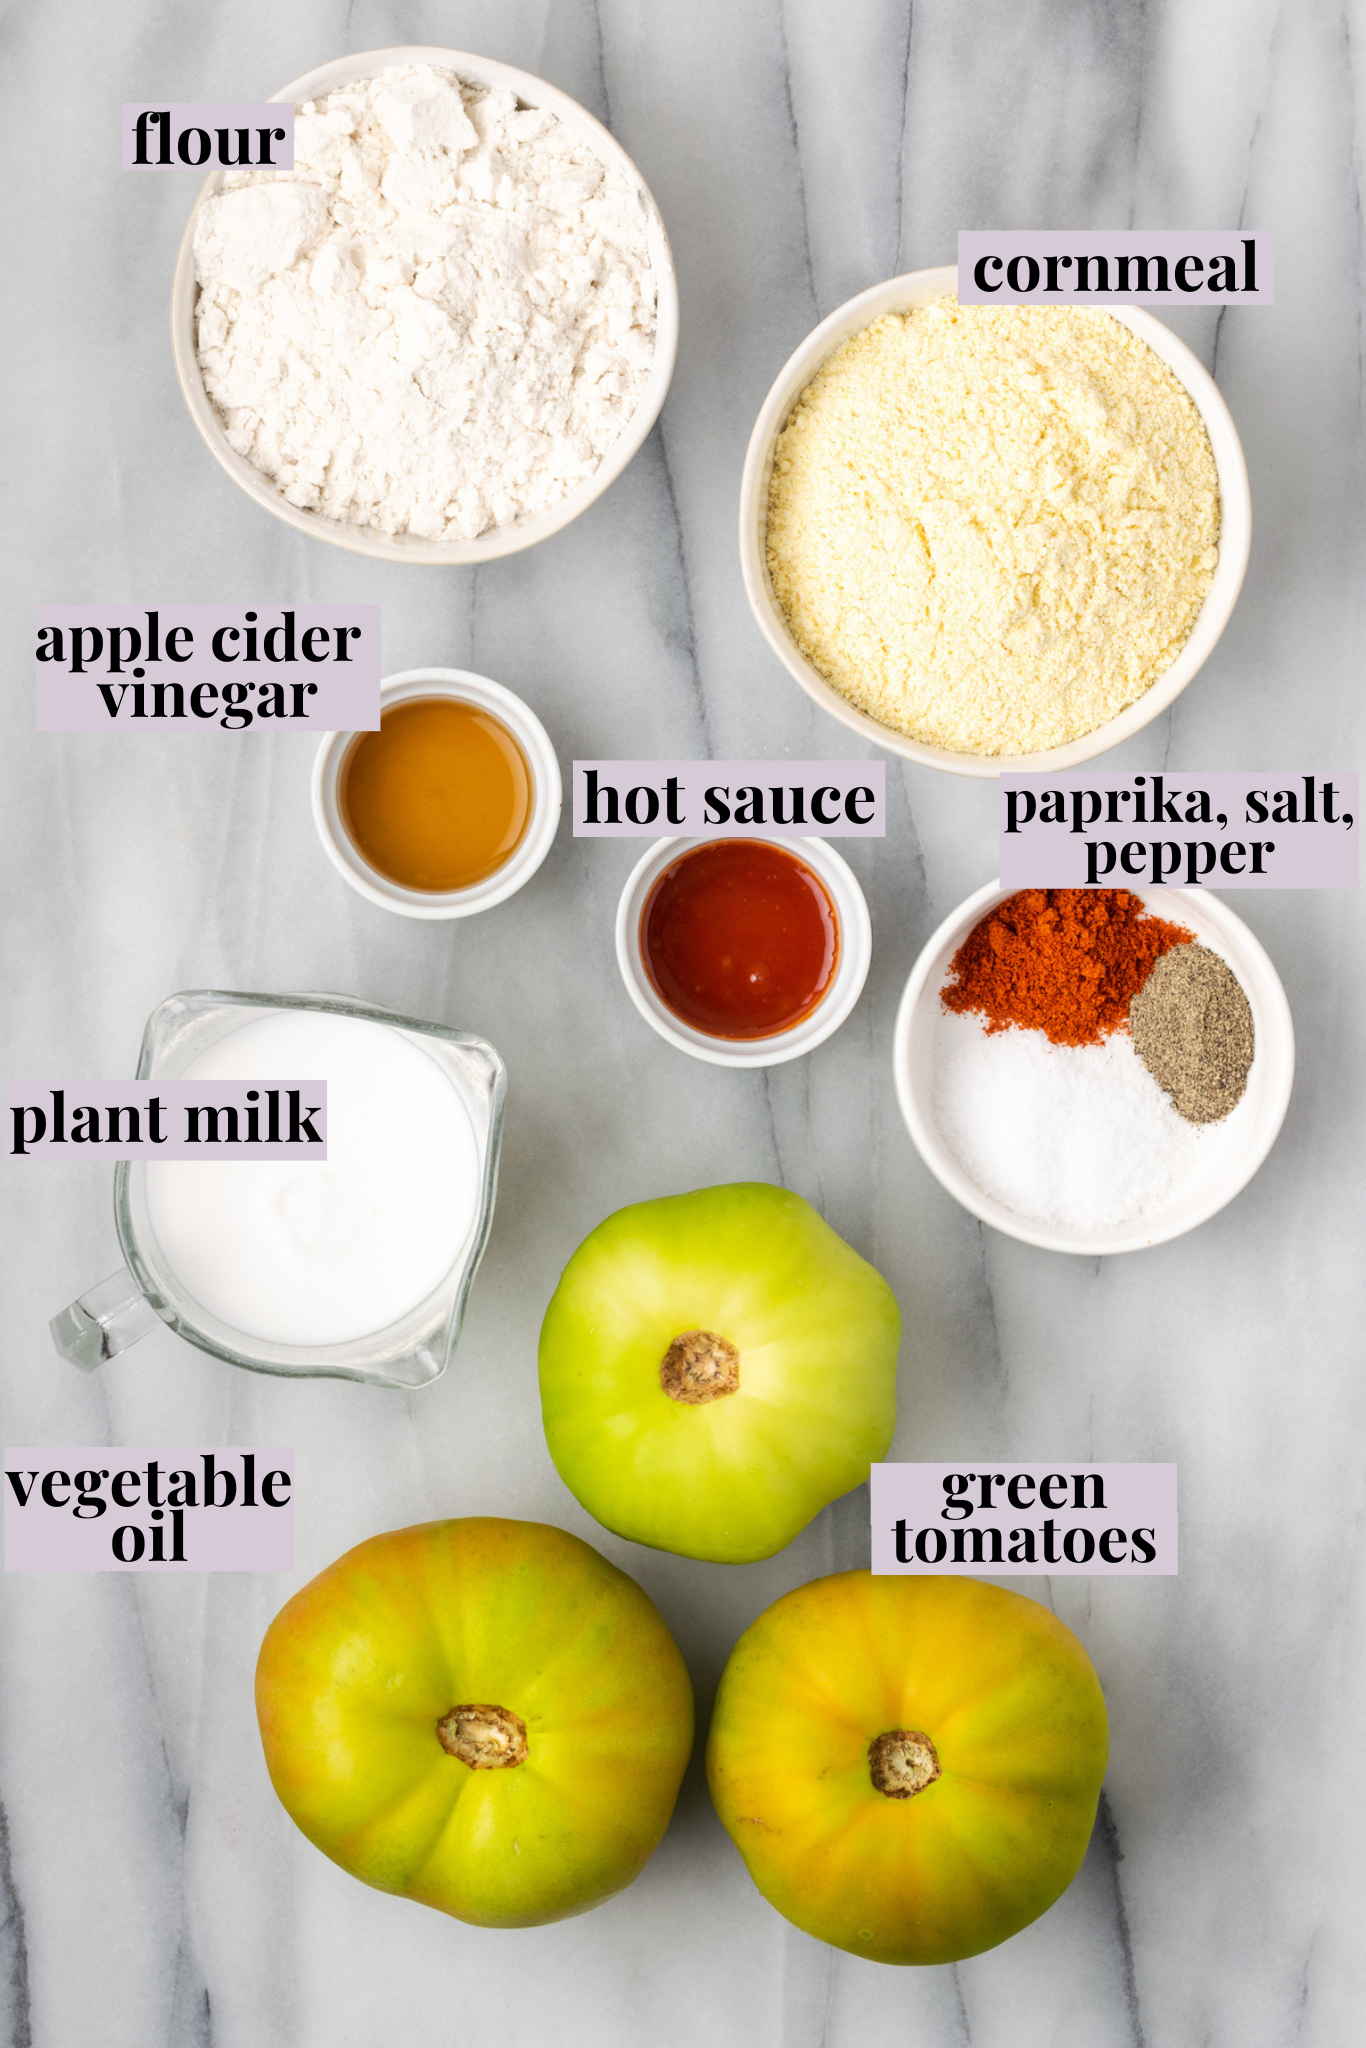 Overhead view of fried green tomato ingredients with labels